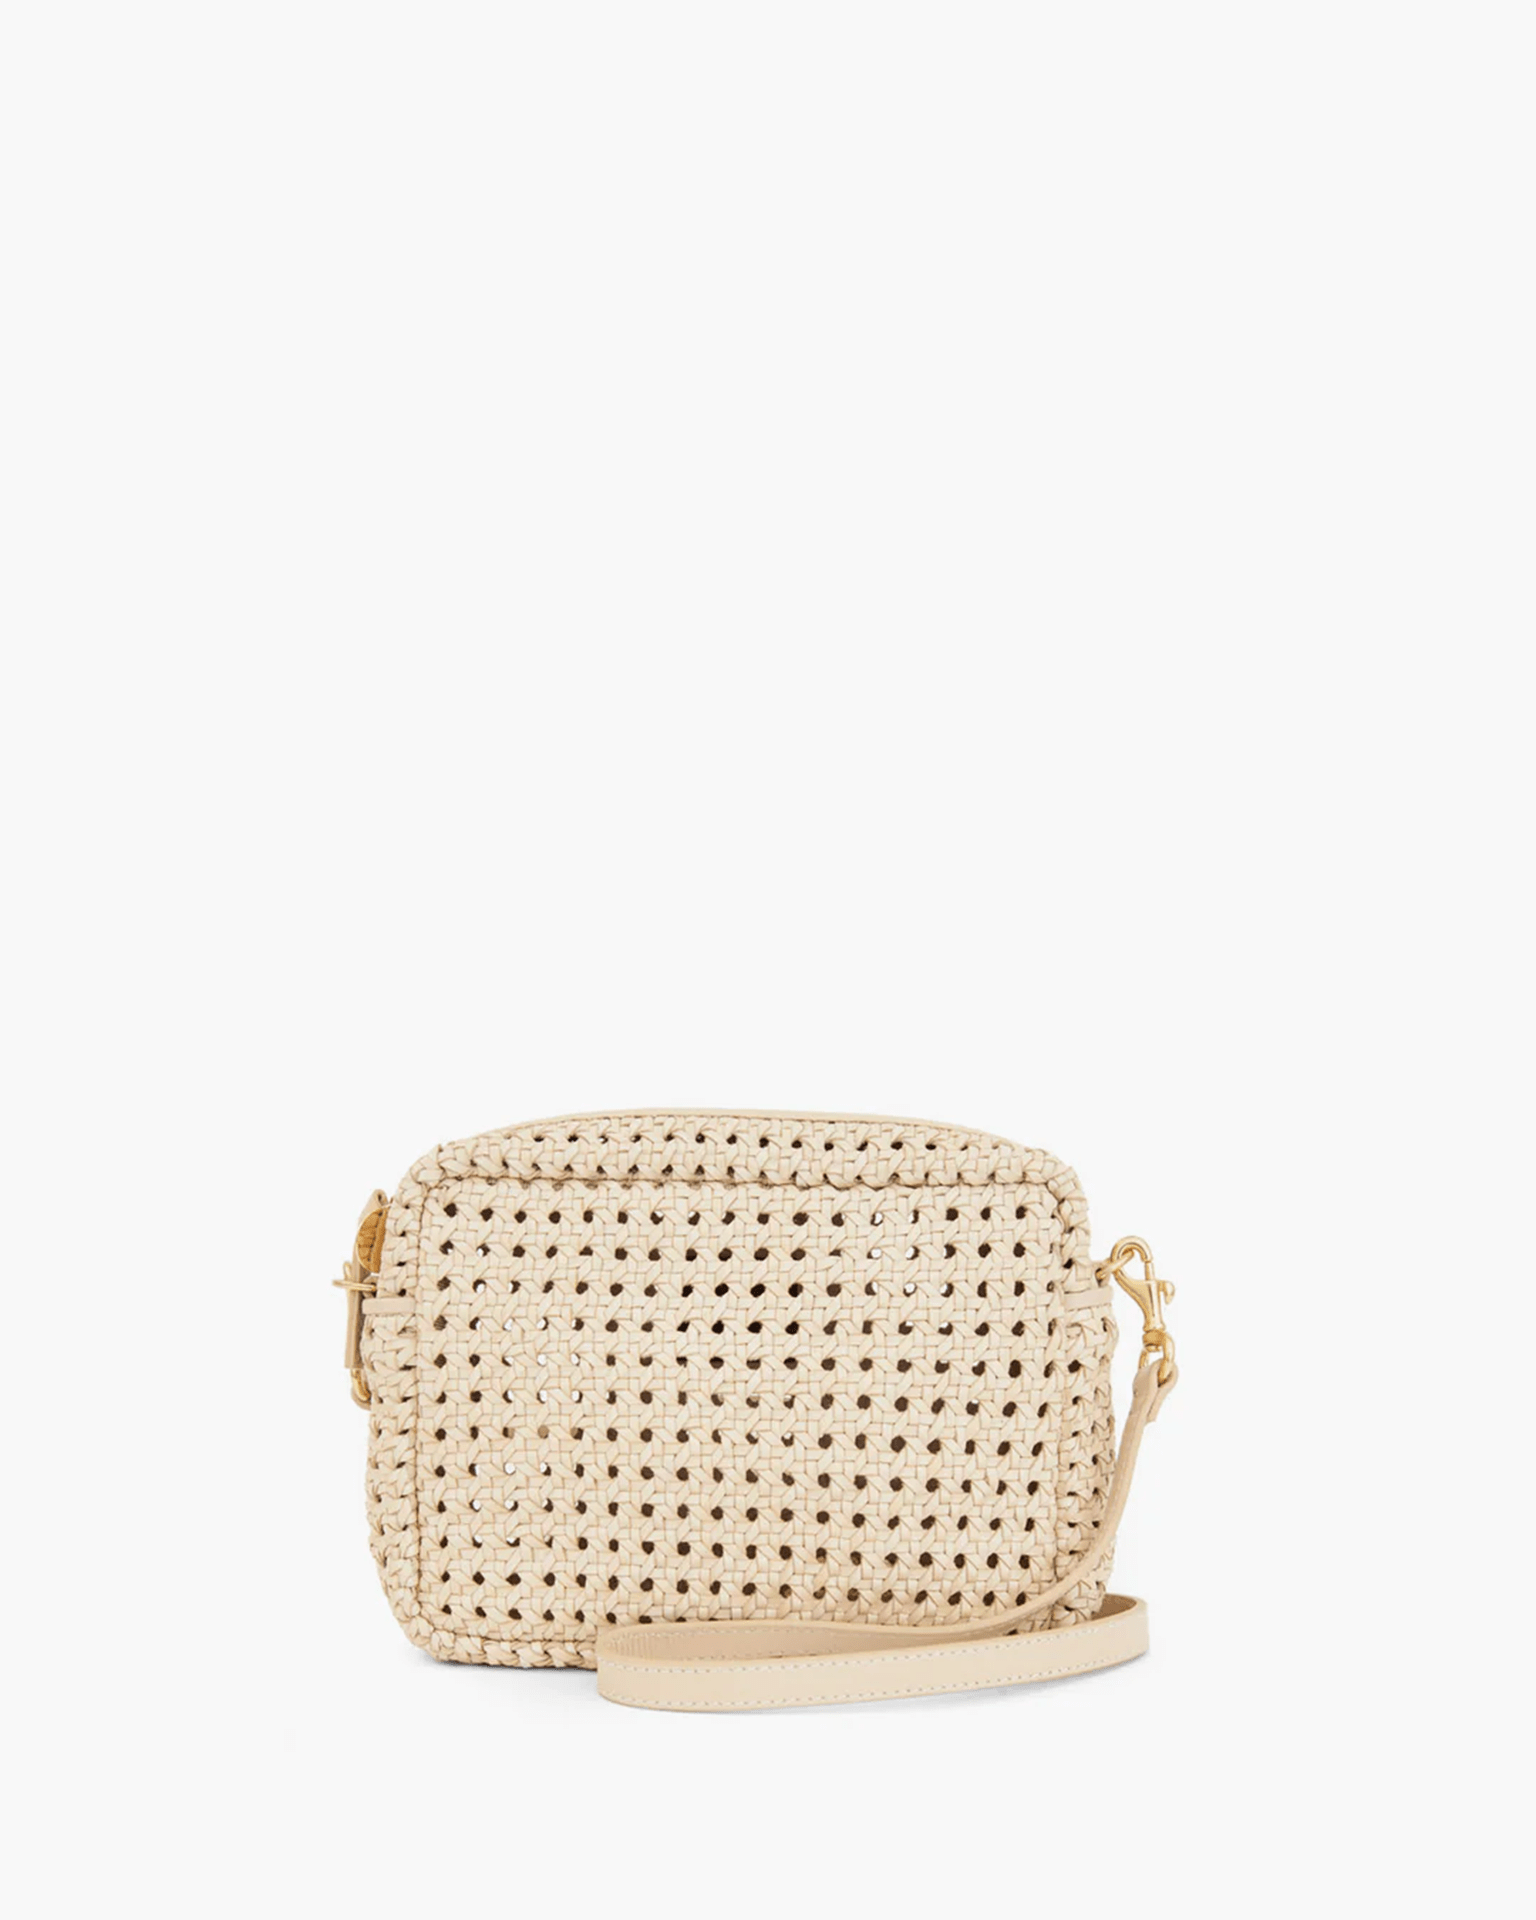 Clare V, Bags, Clare V Croc Embossed Attach Bag